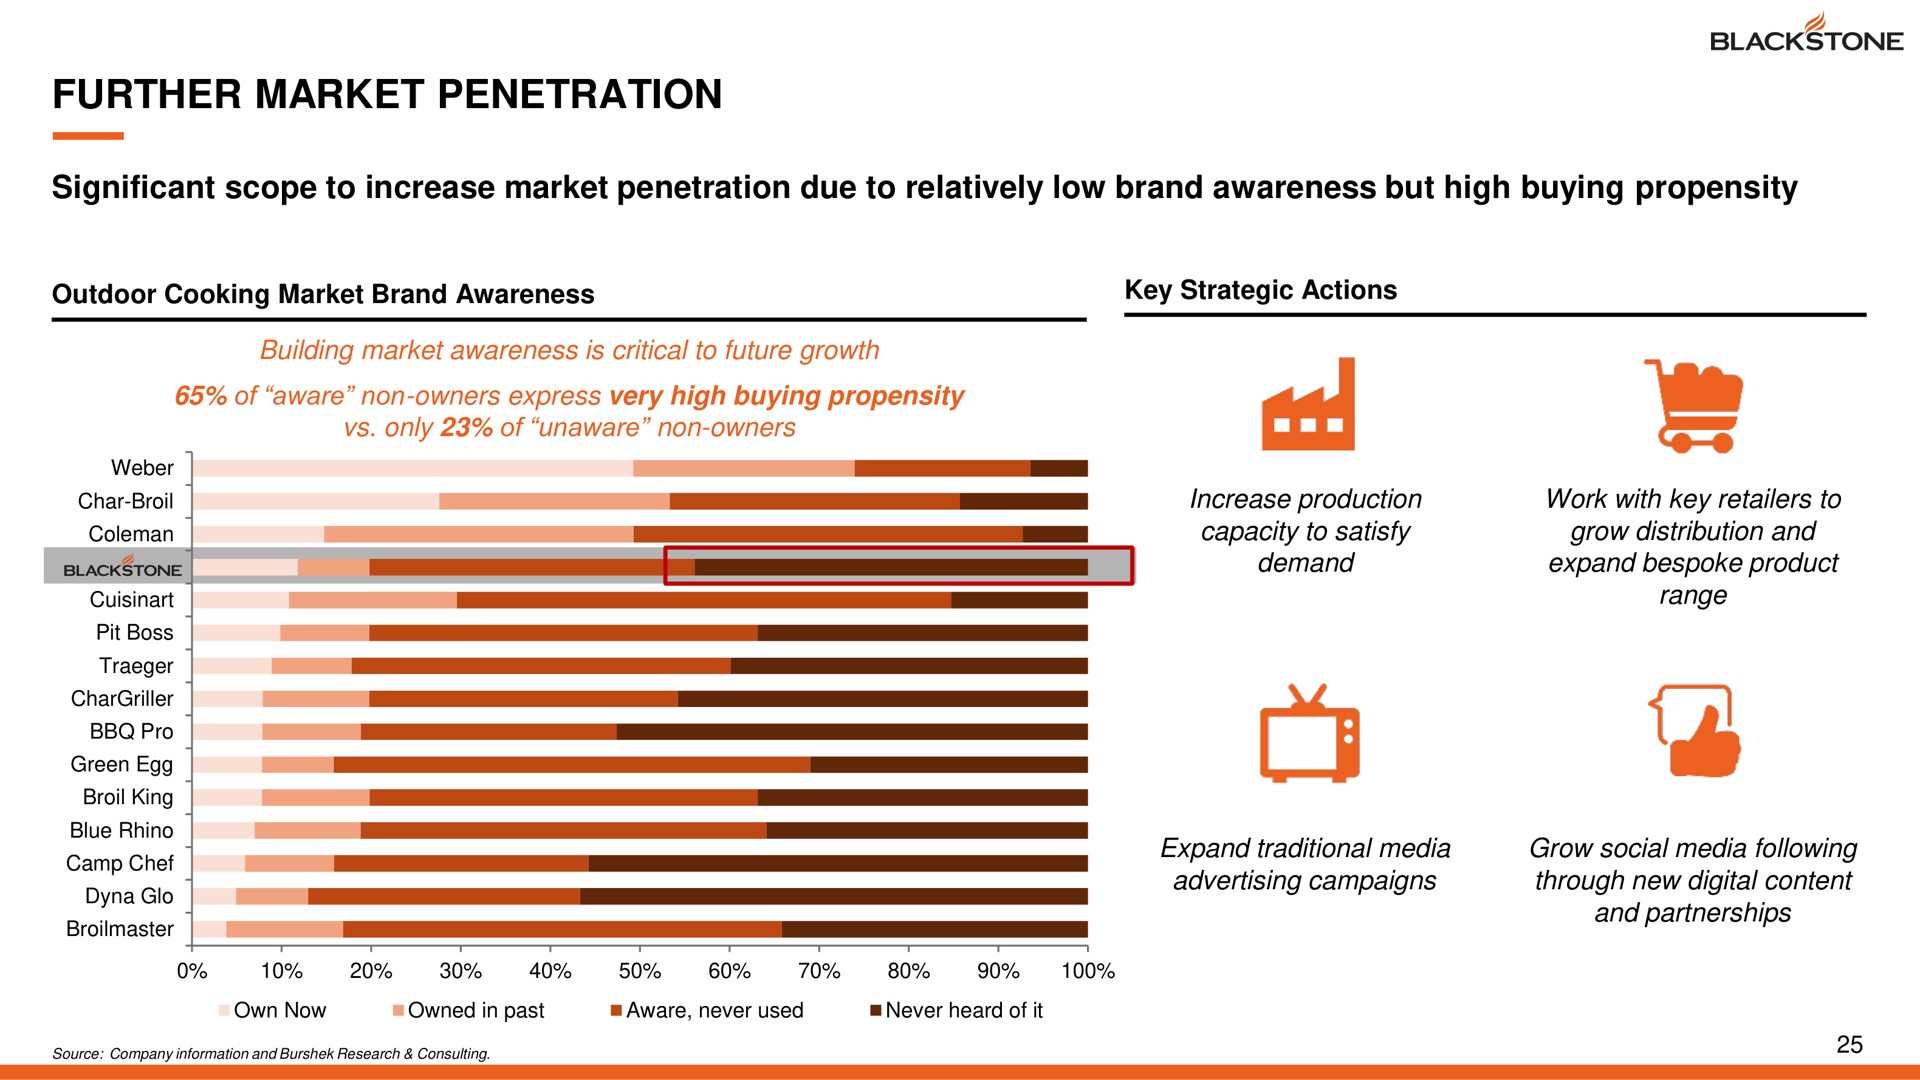 further market penetration significant scope to increase market penetration due to relatively low brand awareness but high buying propensity demand campaigns i | Blackstone Products